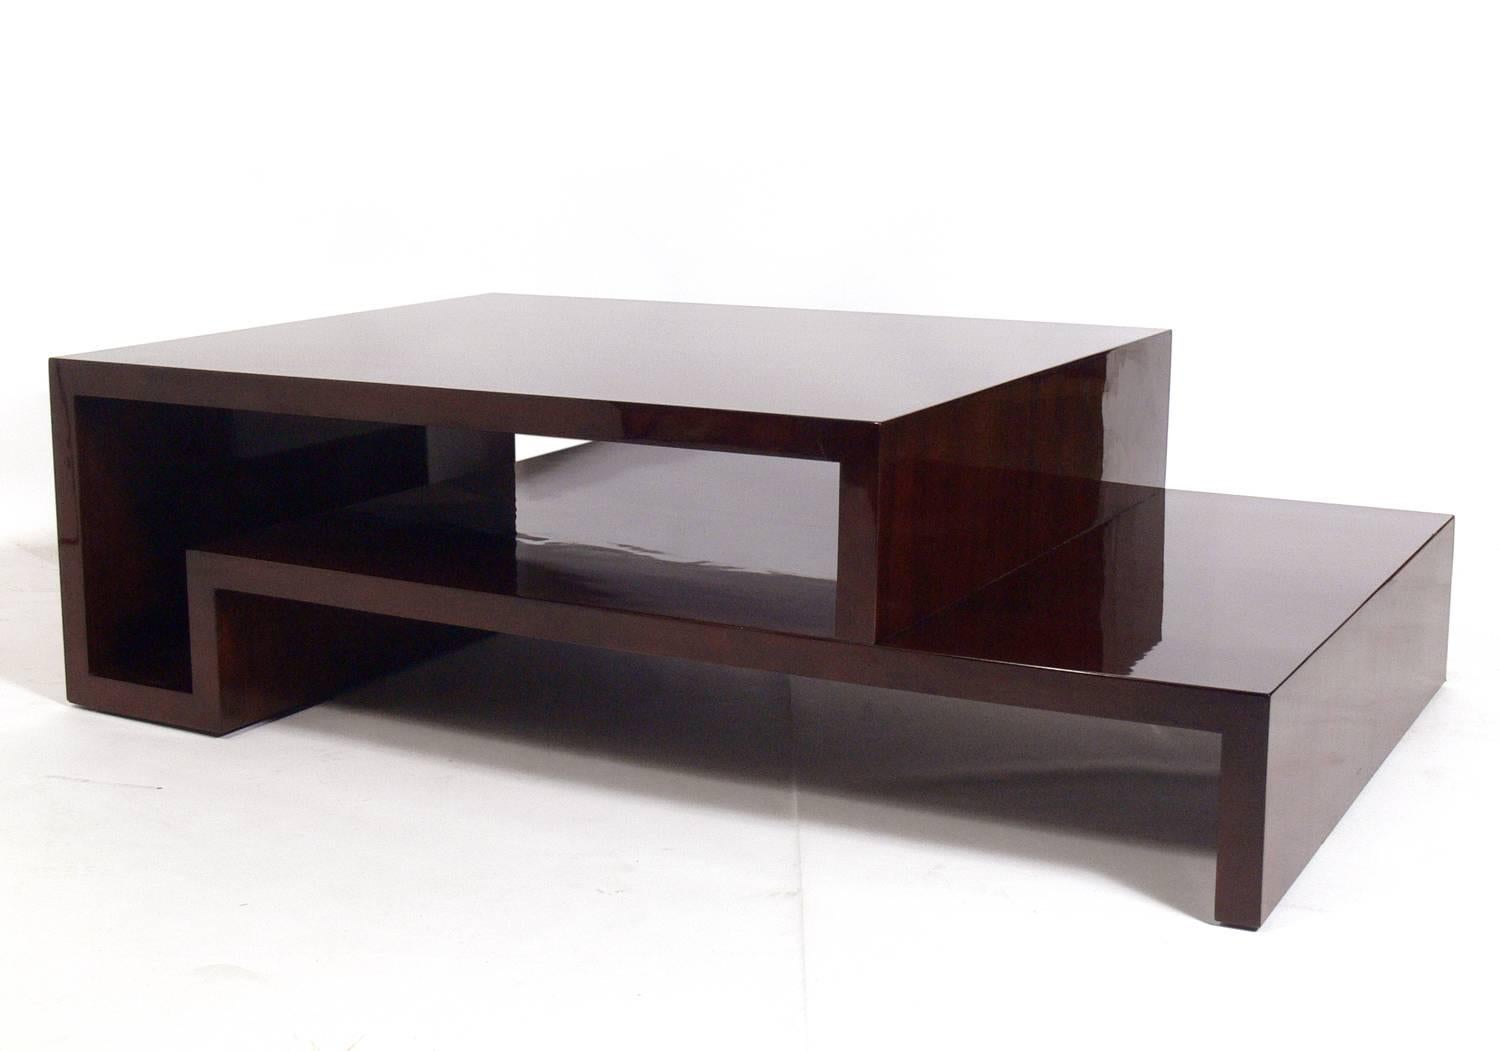 Large-scale modern coffee table by Lorin Marsh, circa 1990s. Sculptural form in a sleek lacquer finish.